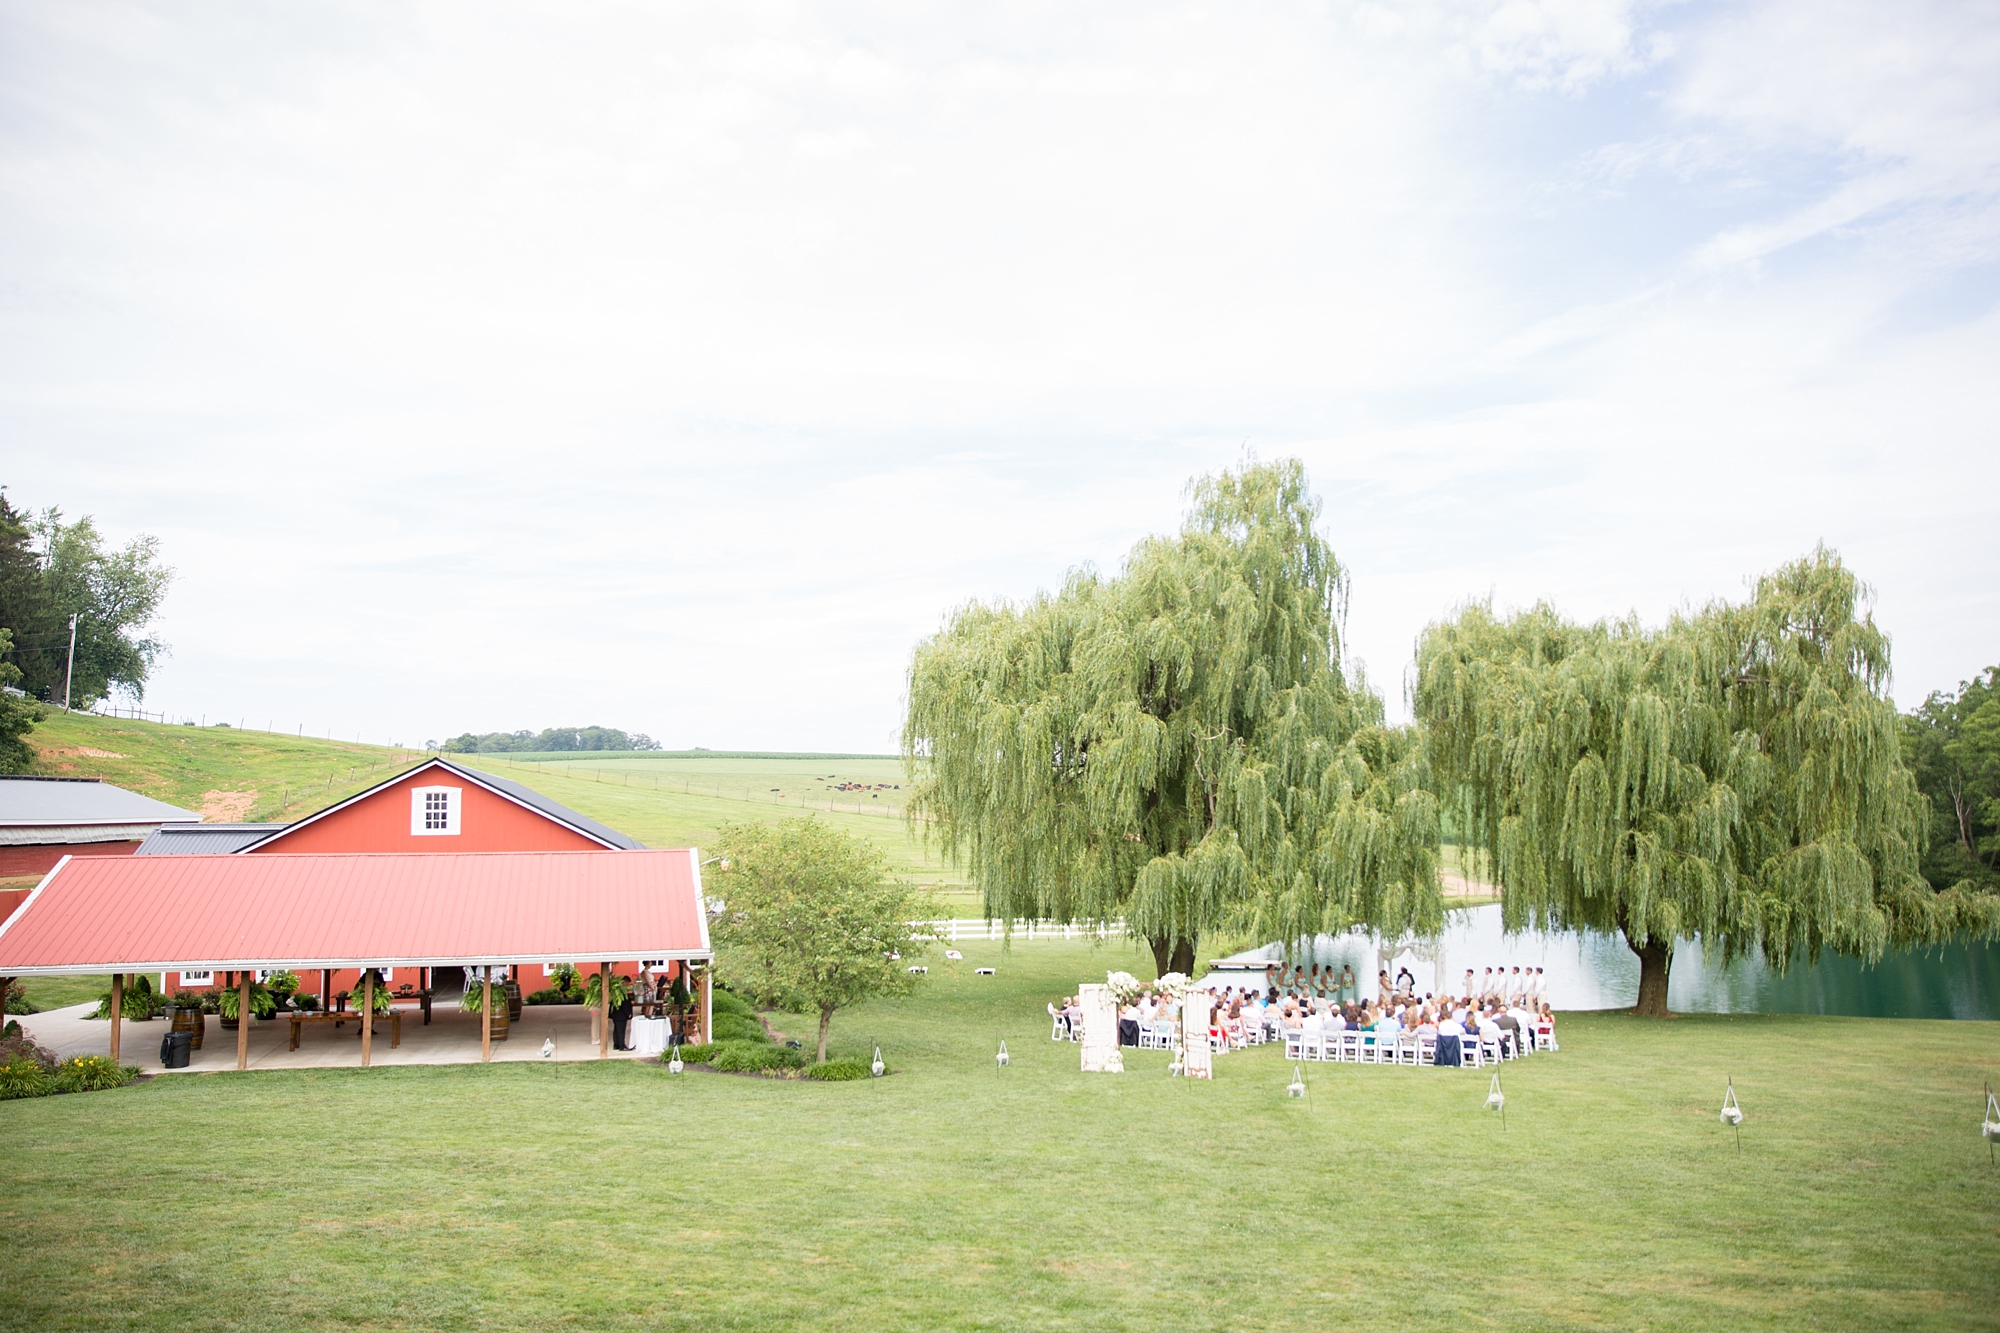 Denny & Joy {Pond View Farm in White Hall, MD} — Anna Grace Photography